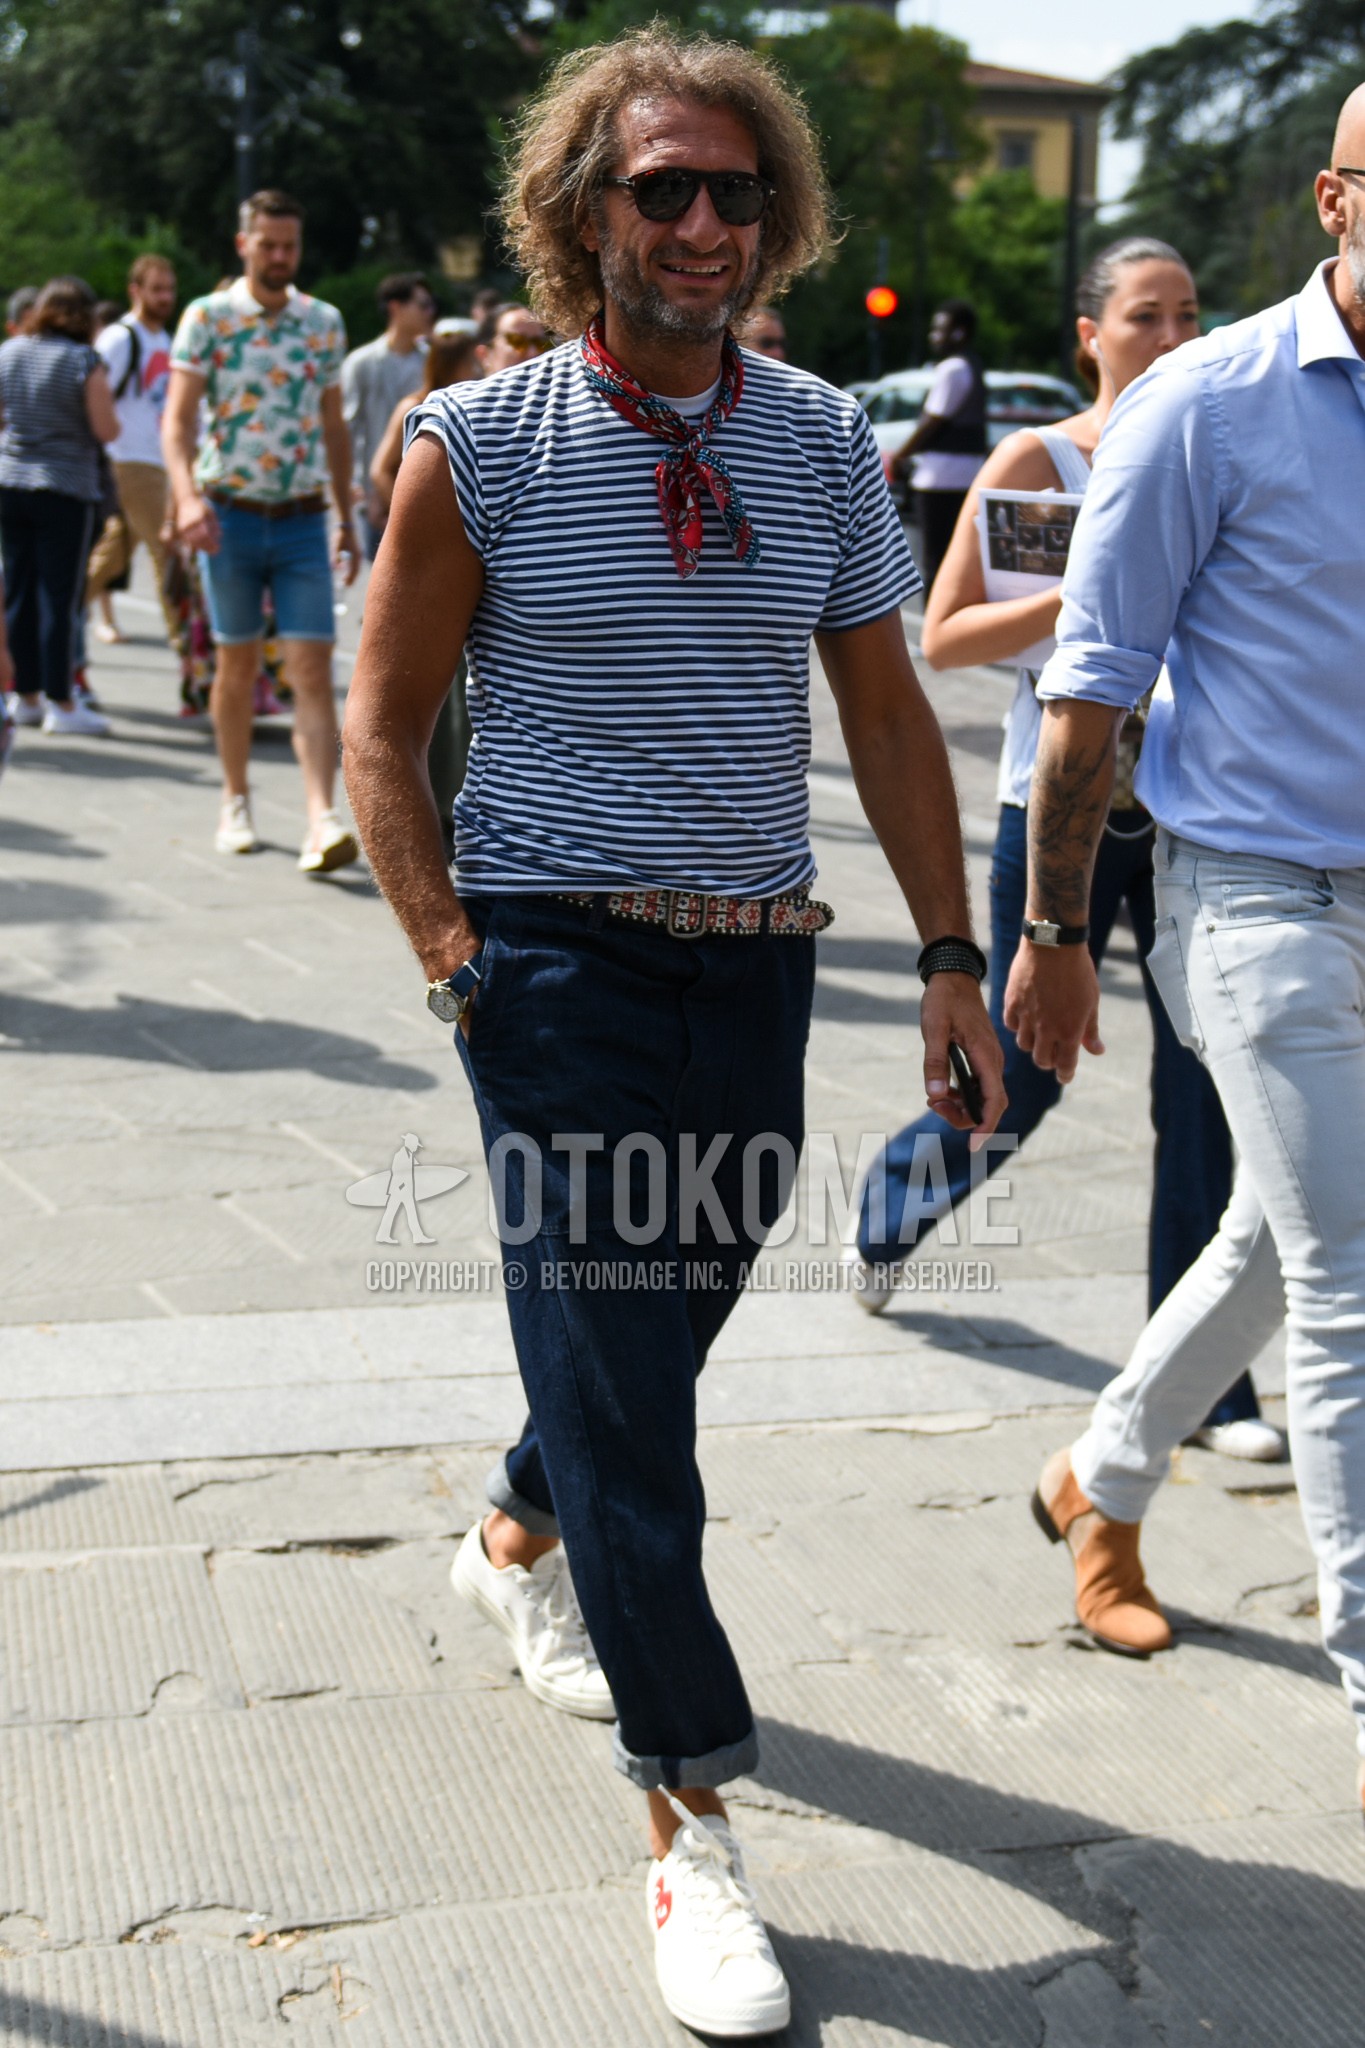 Men's summer outfit with brown tortoiseshell sunglasses, red scarf bandana/neckerchief, white navy horizontal stripes t-shirt, red belt leather belt, navy plain denim/jeans, white low-cut sneakers.